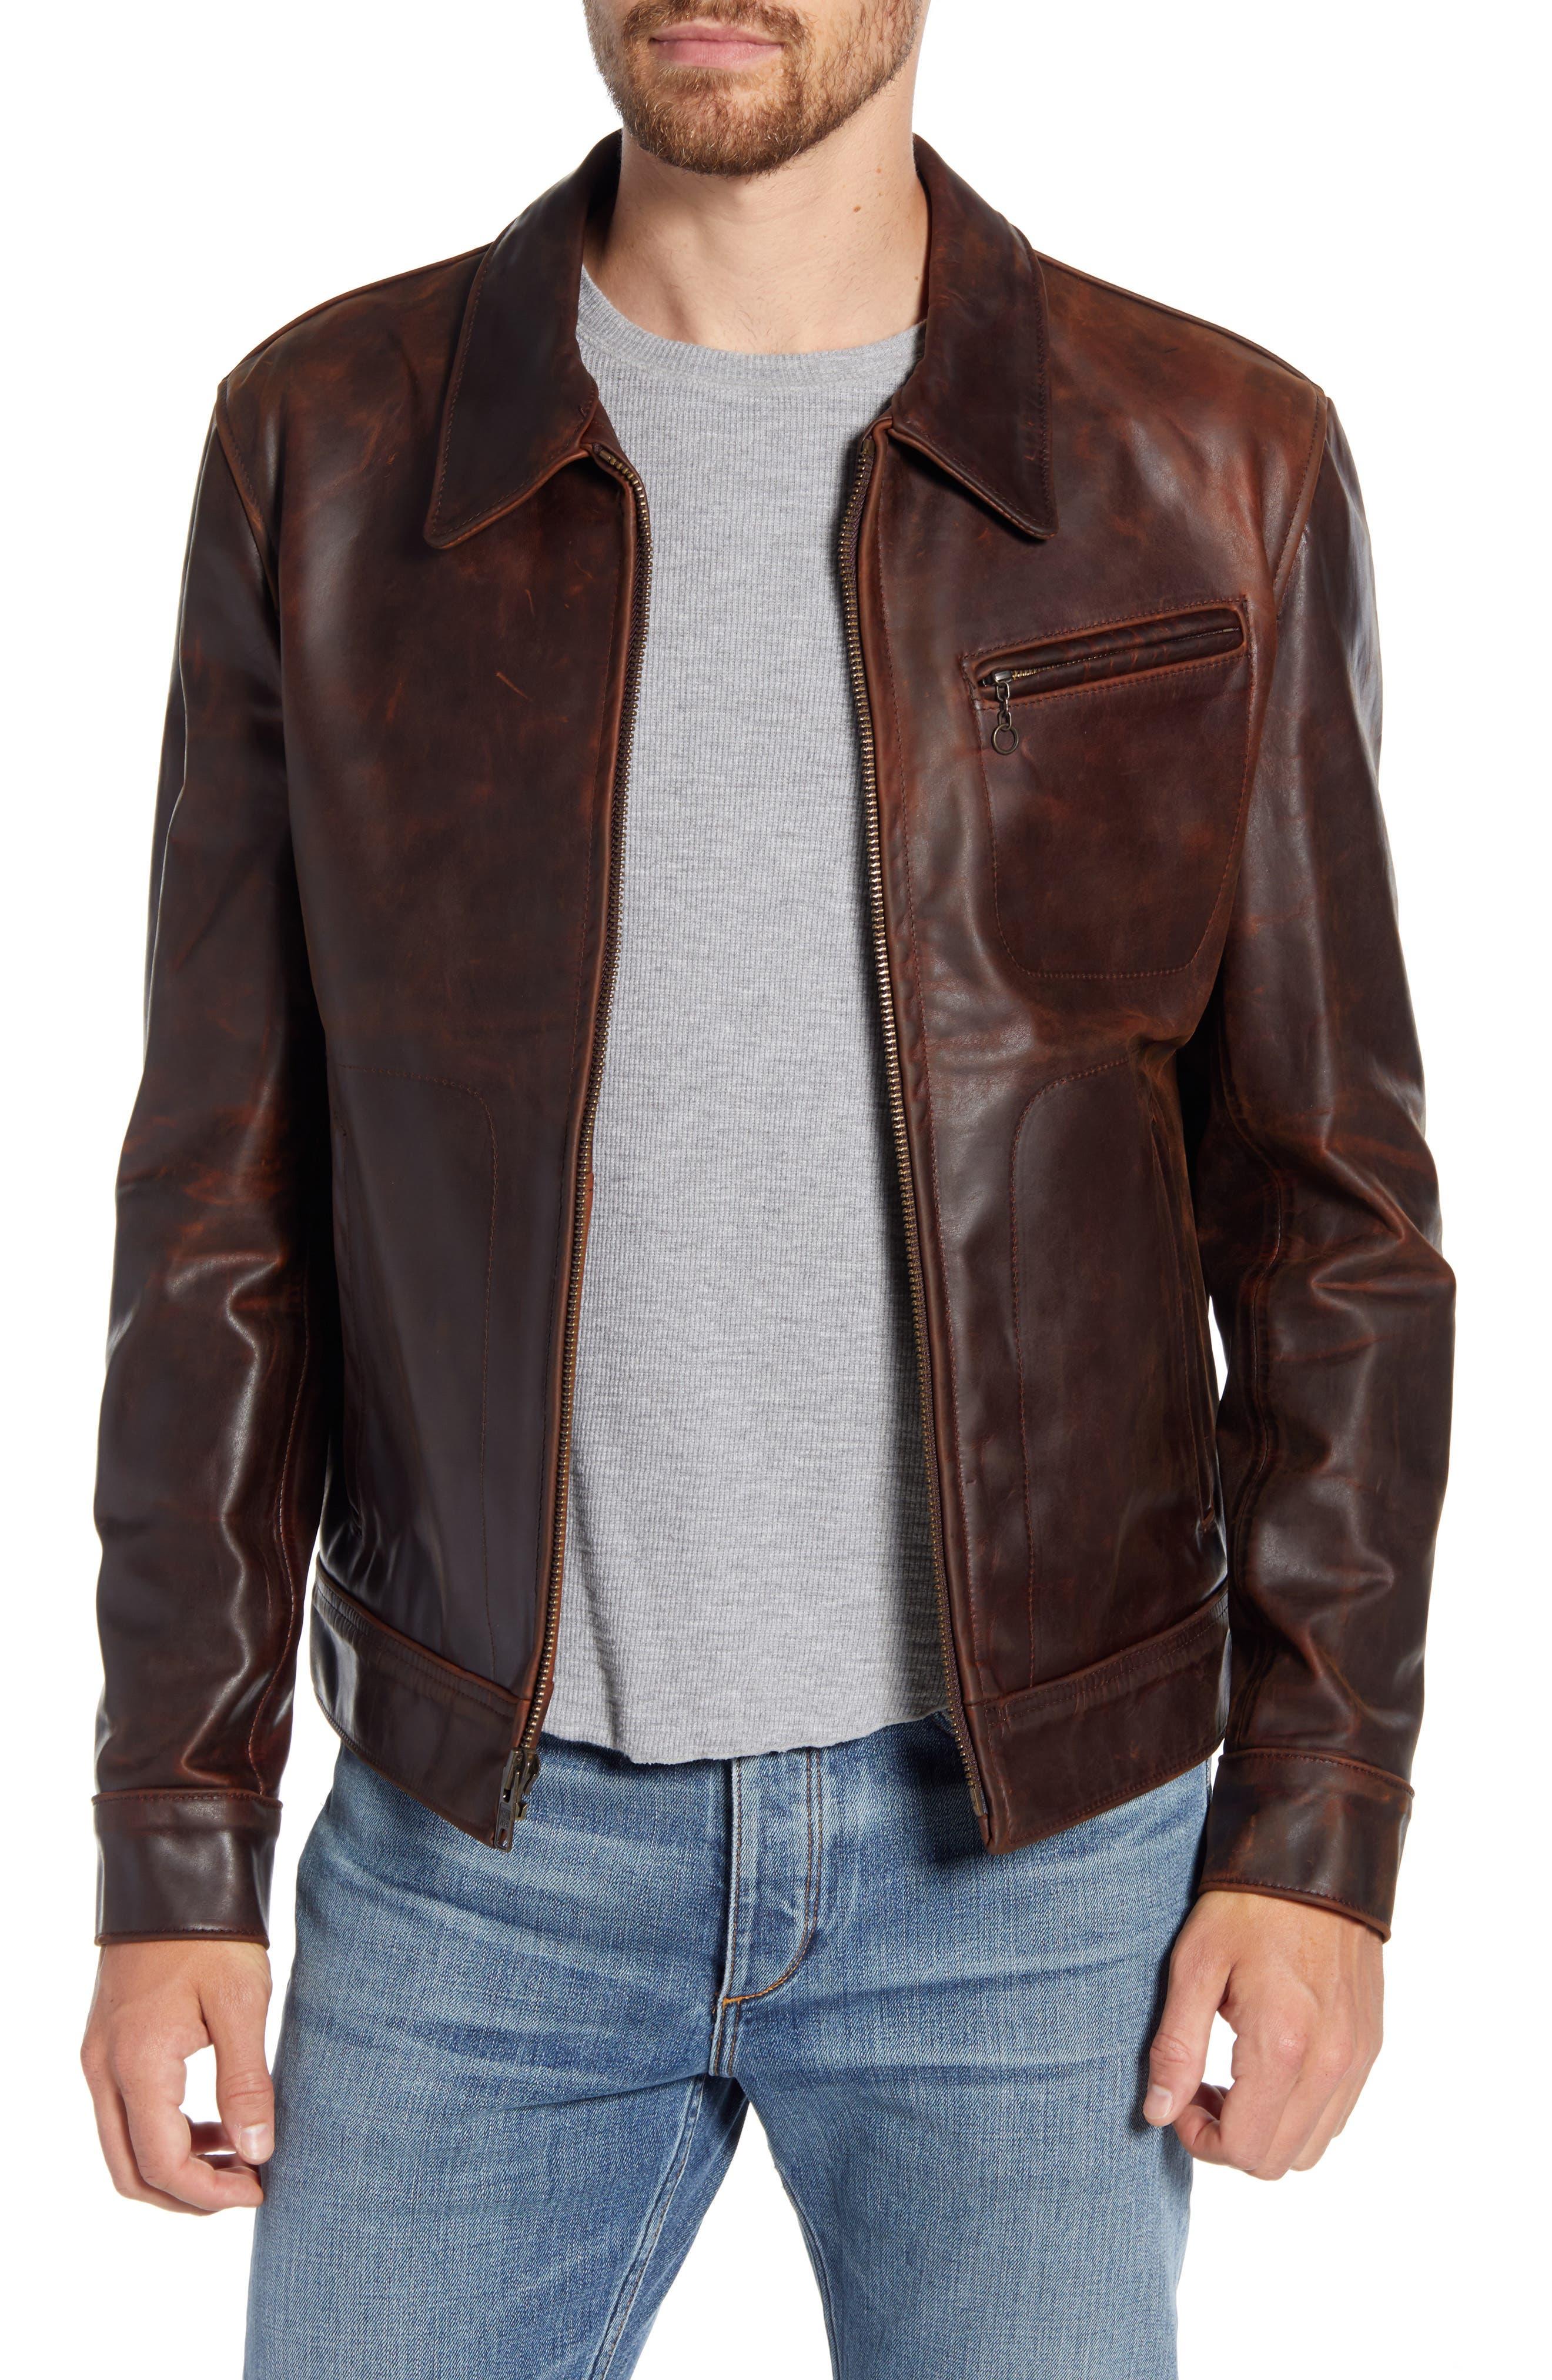 Schott Nyc Lightweight Vintage Oil Tanned Unlined Cowhide Leather ...